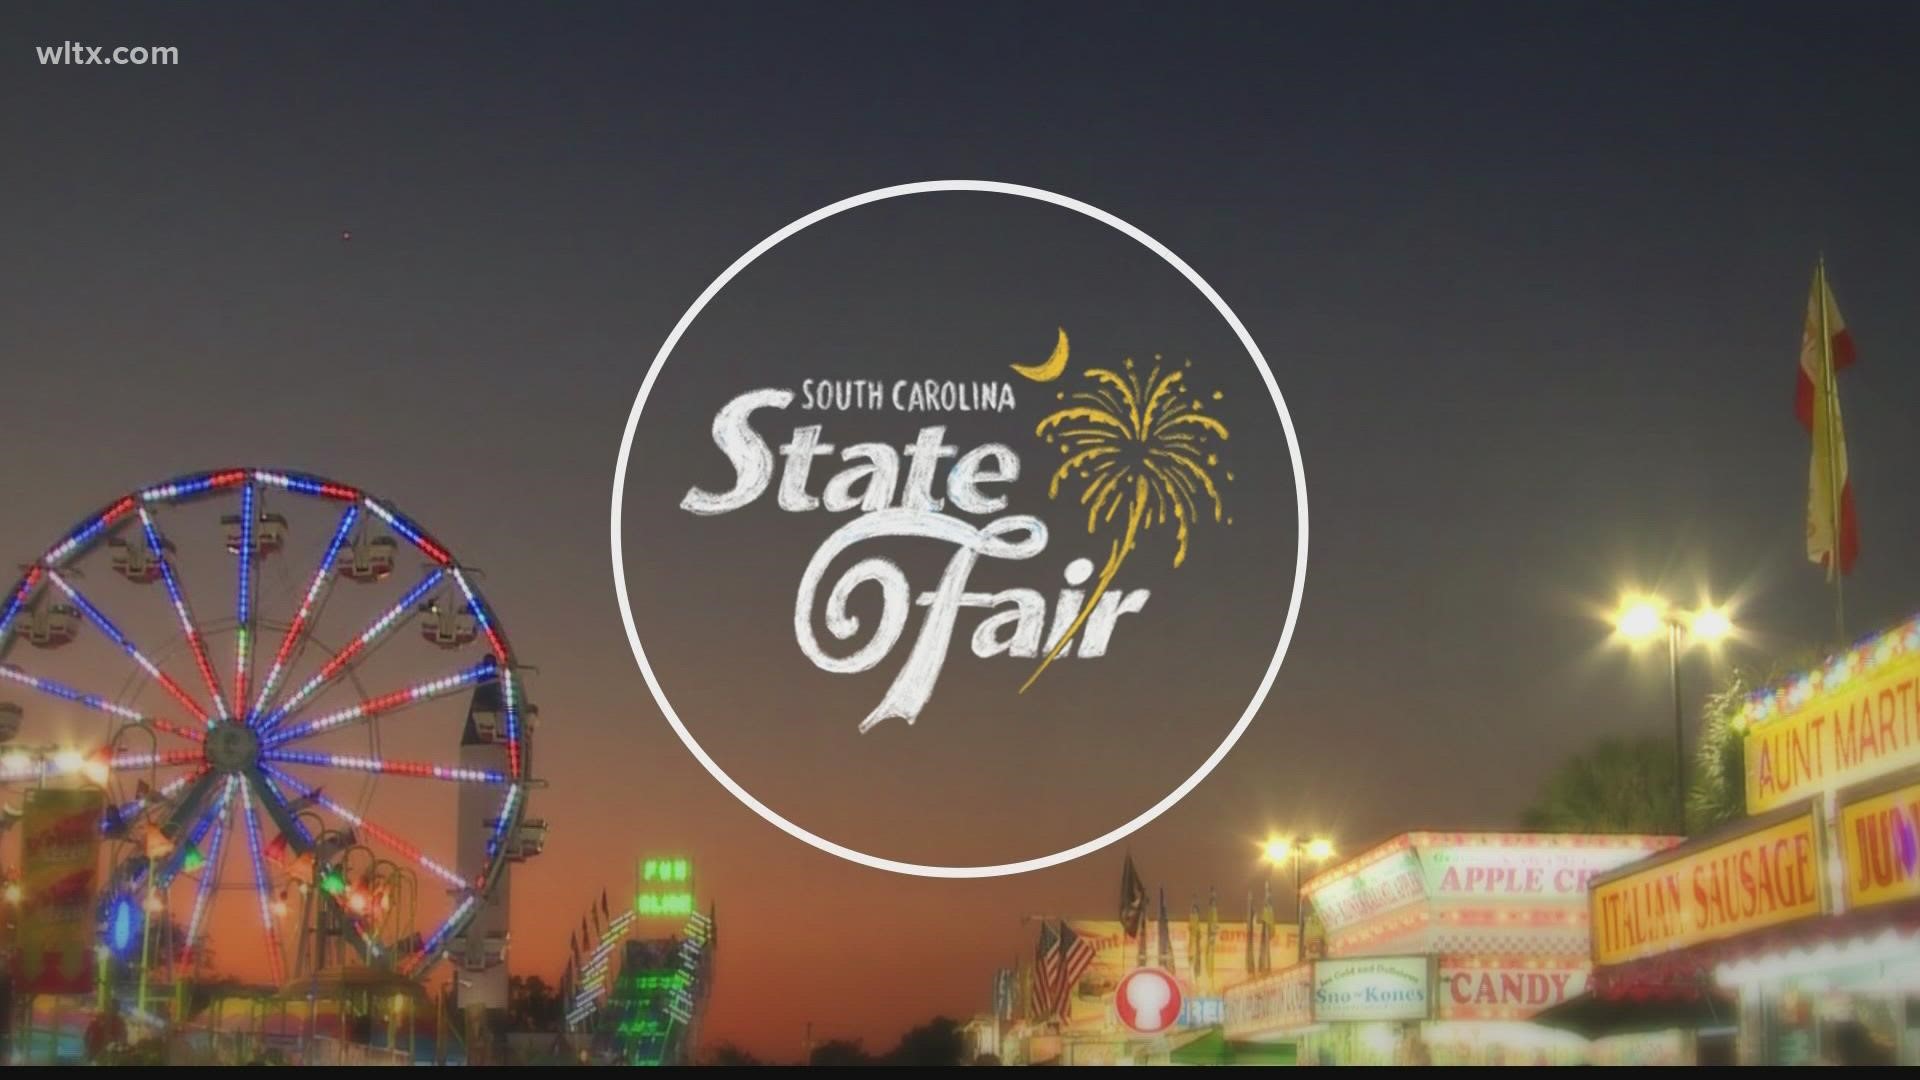 Advance tickets are on sale now for the 153rd South Carolina State Fair happening October 12-23.